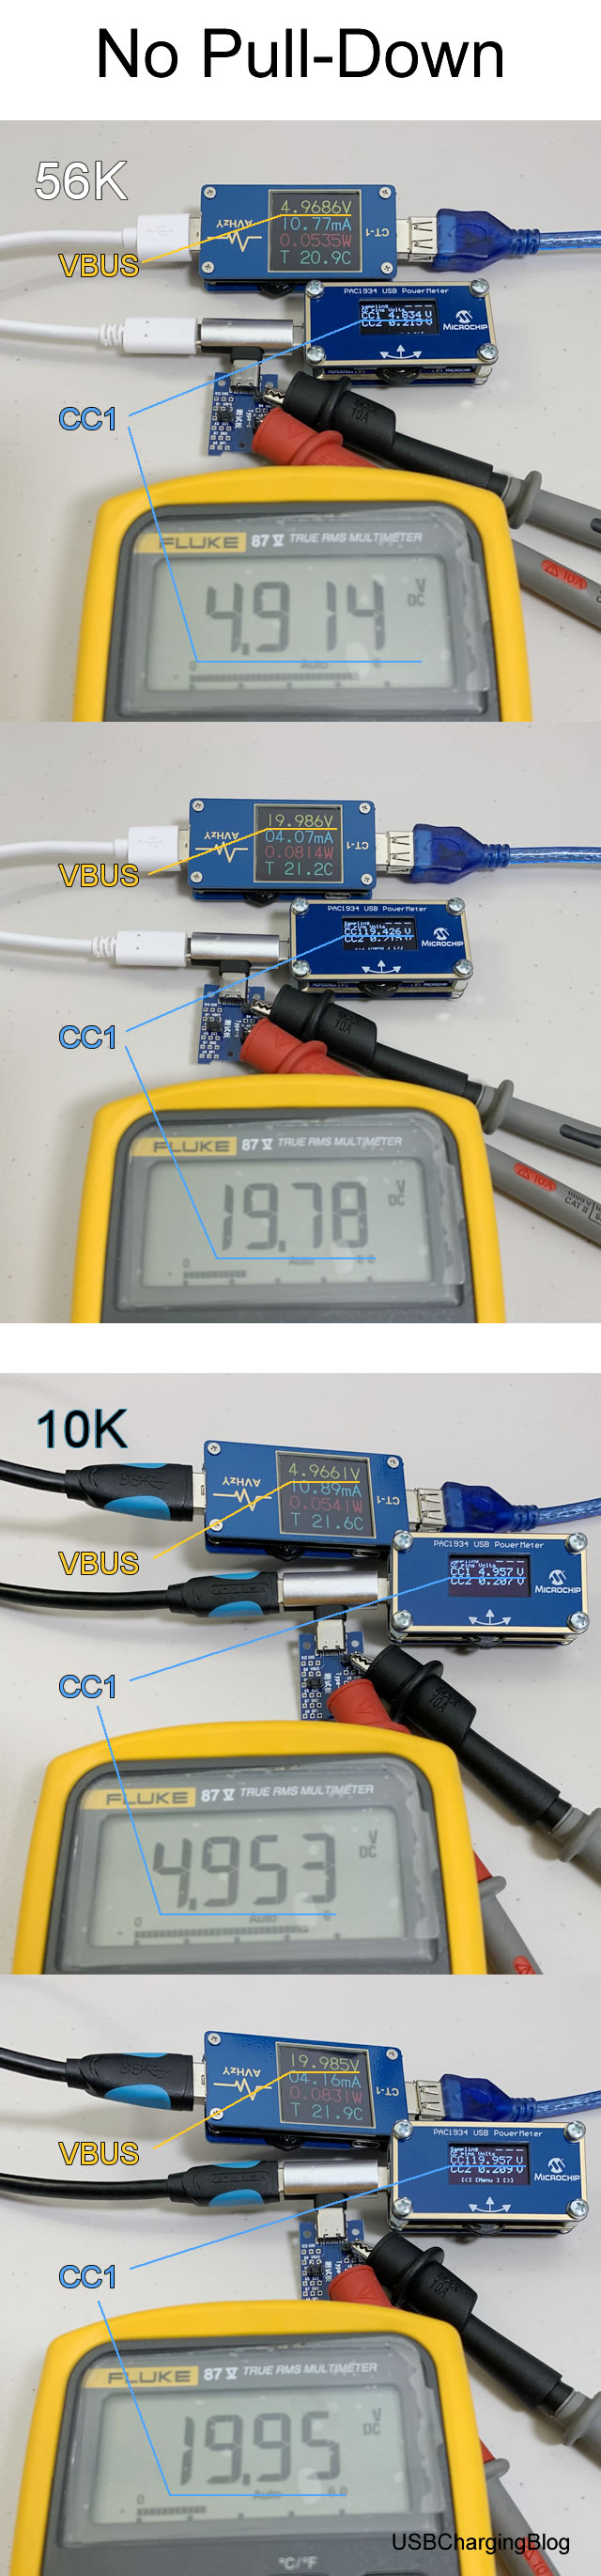 Blow_up_usb_tester-CC1_voltage_no_pull-down